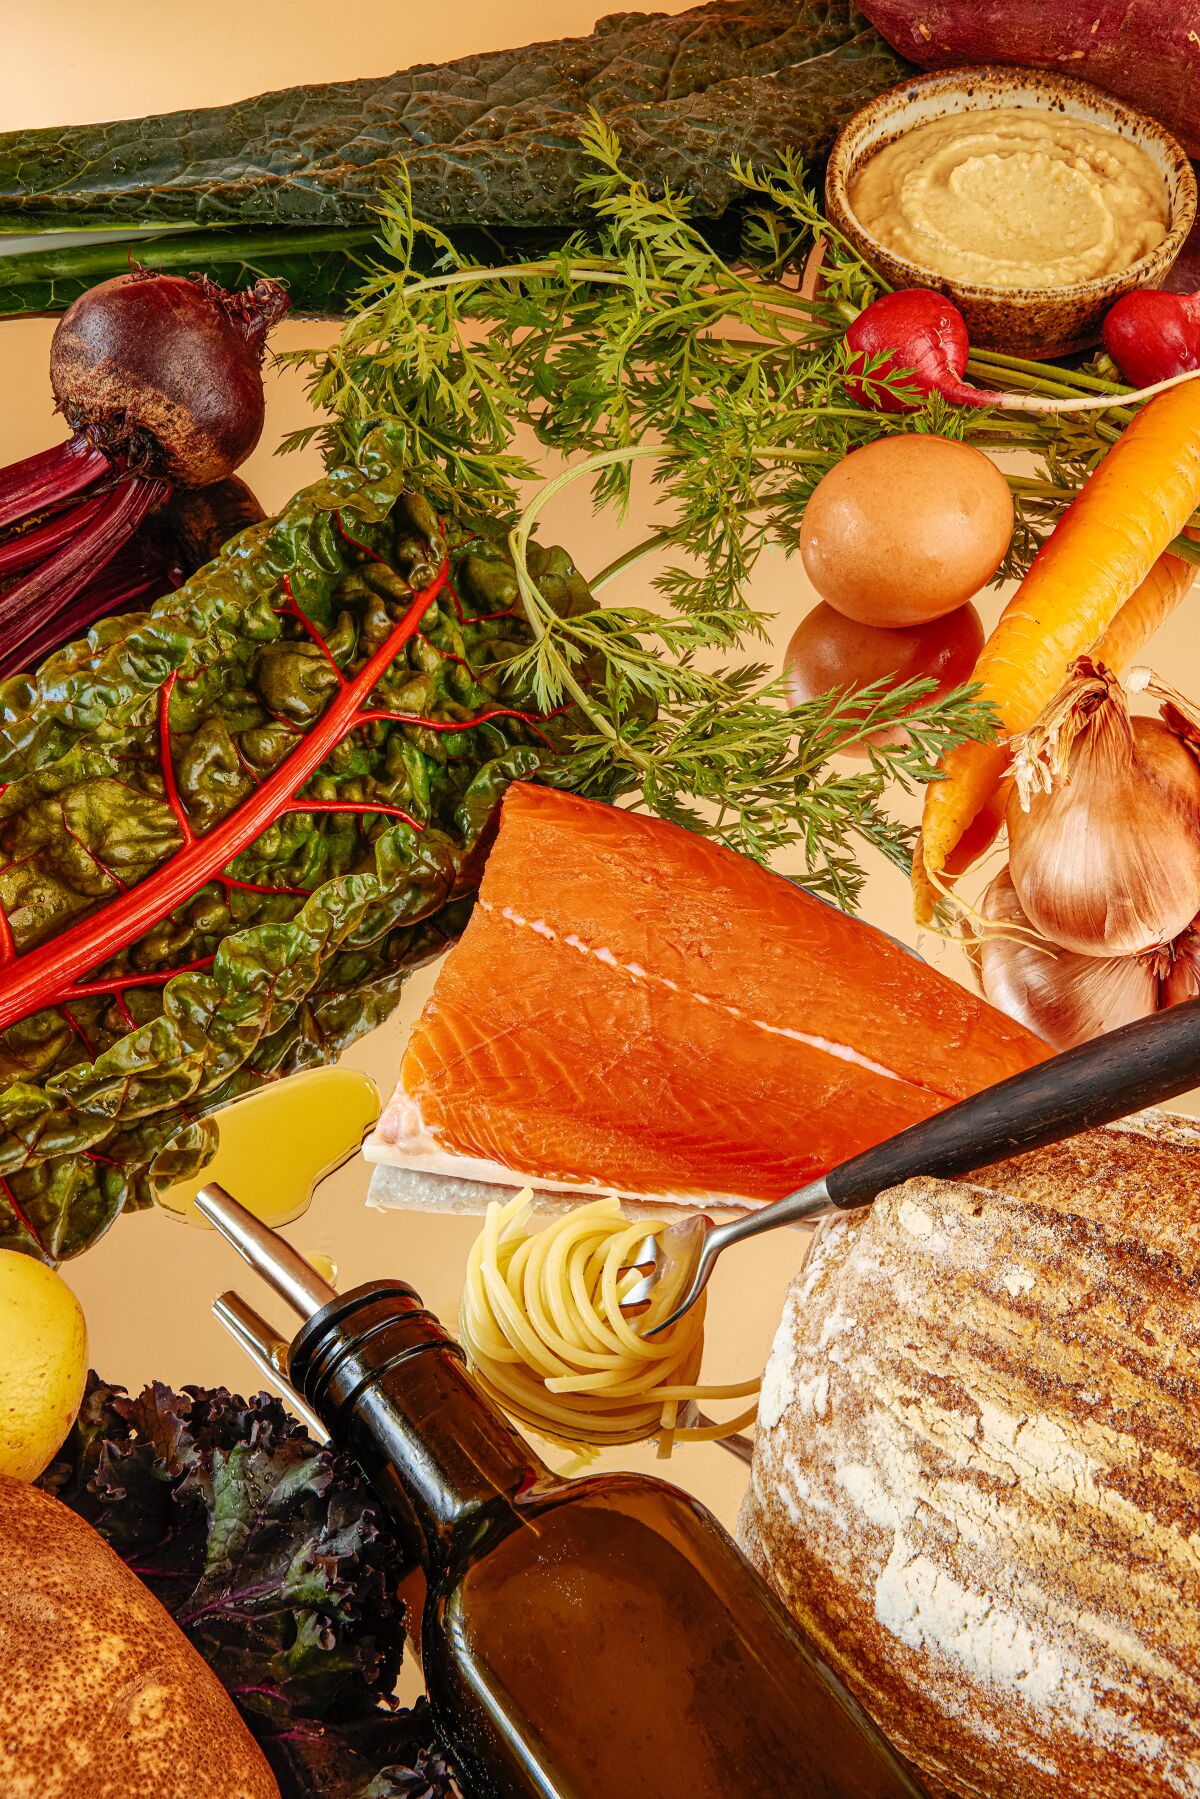 Staples of the Mediterranean diet: grains, root vegetables, olive oil, hummus, leafy greens and lean fish like salmon.